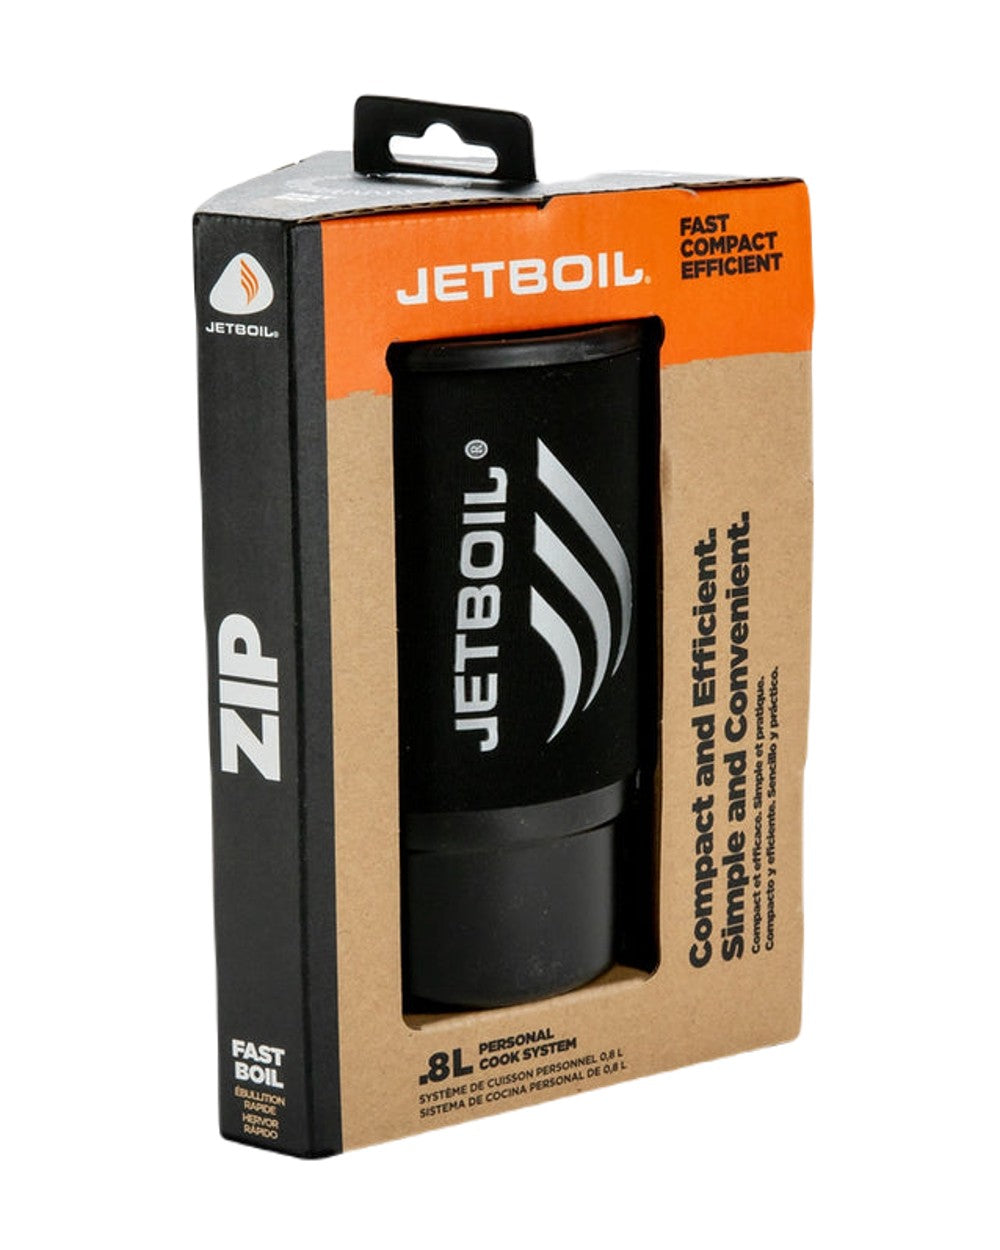 Jetboil Zip Cooking System In Carbon